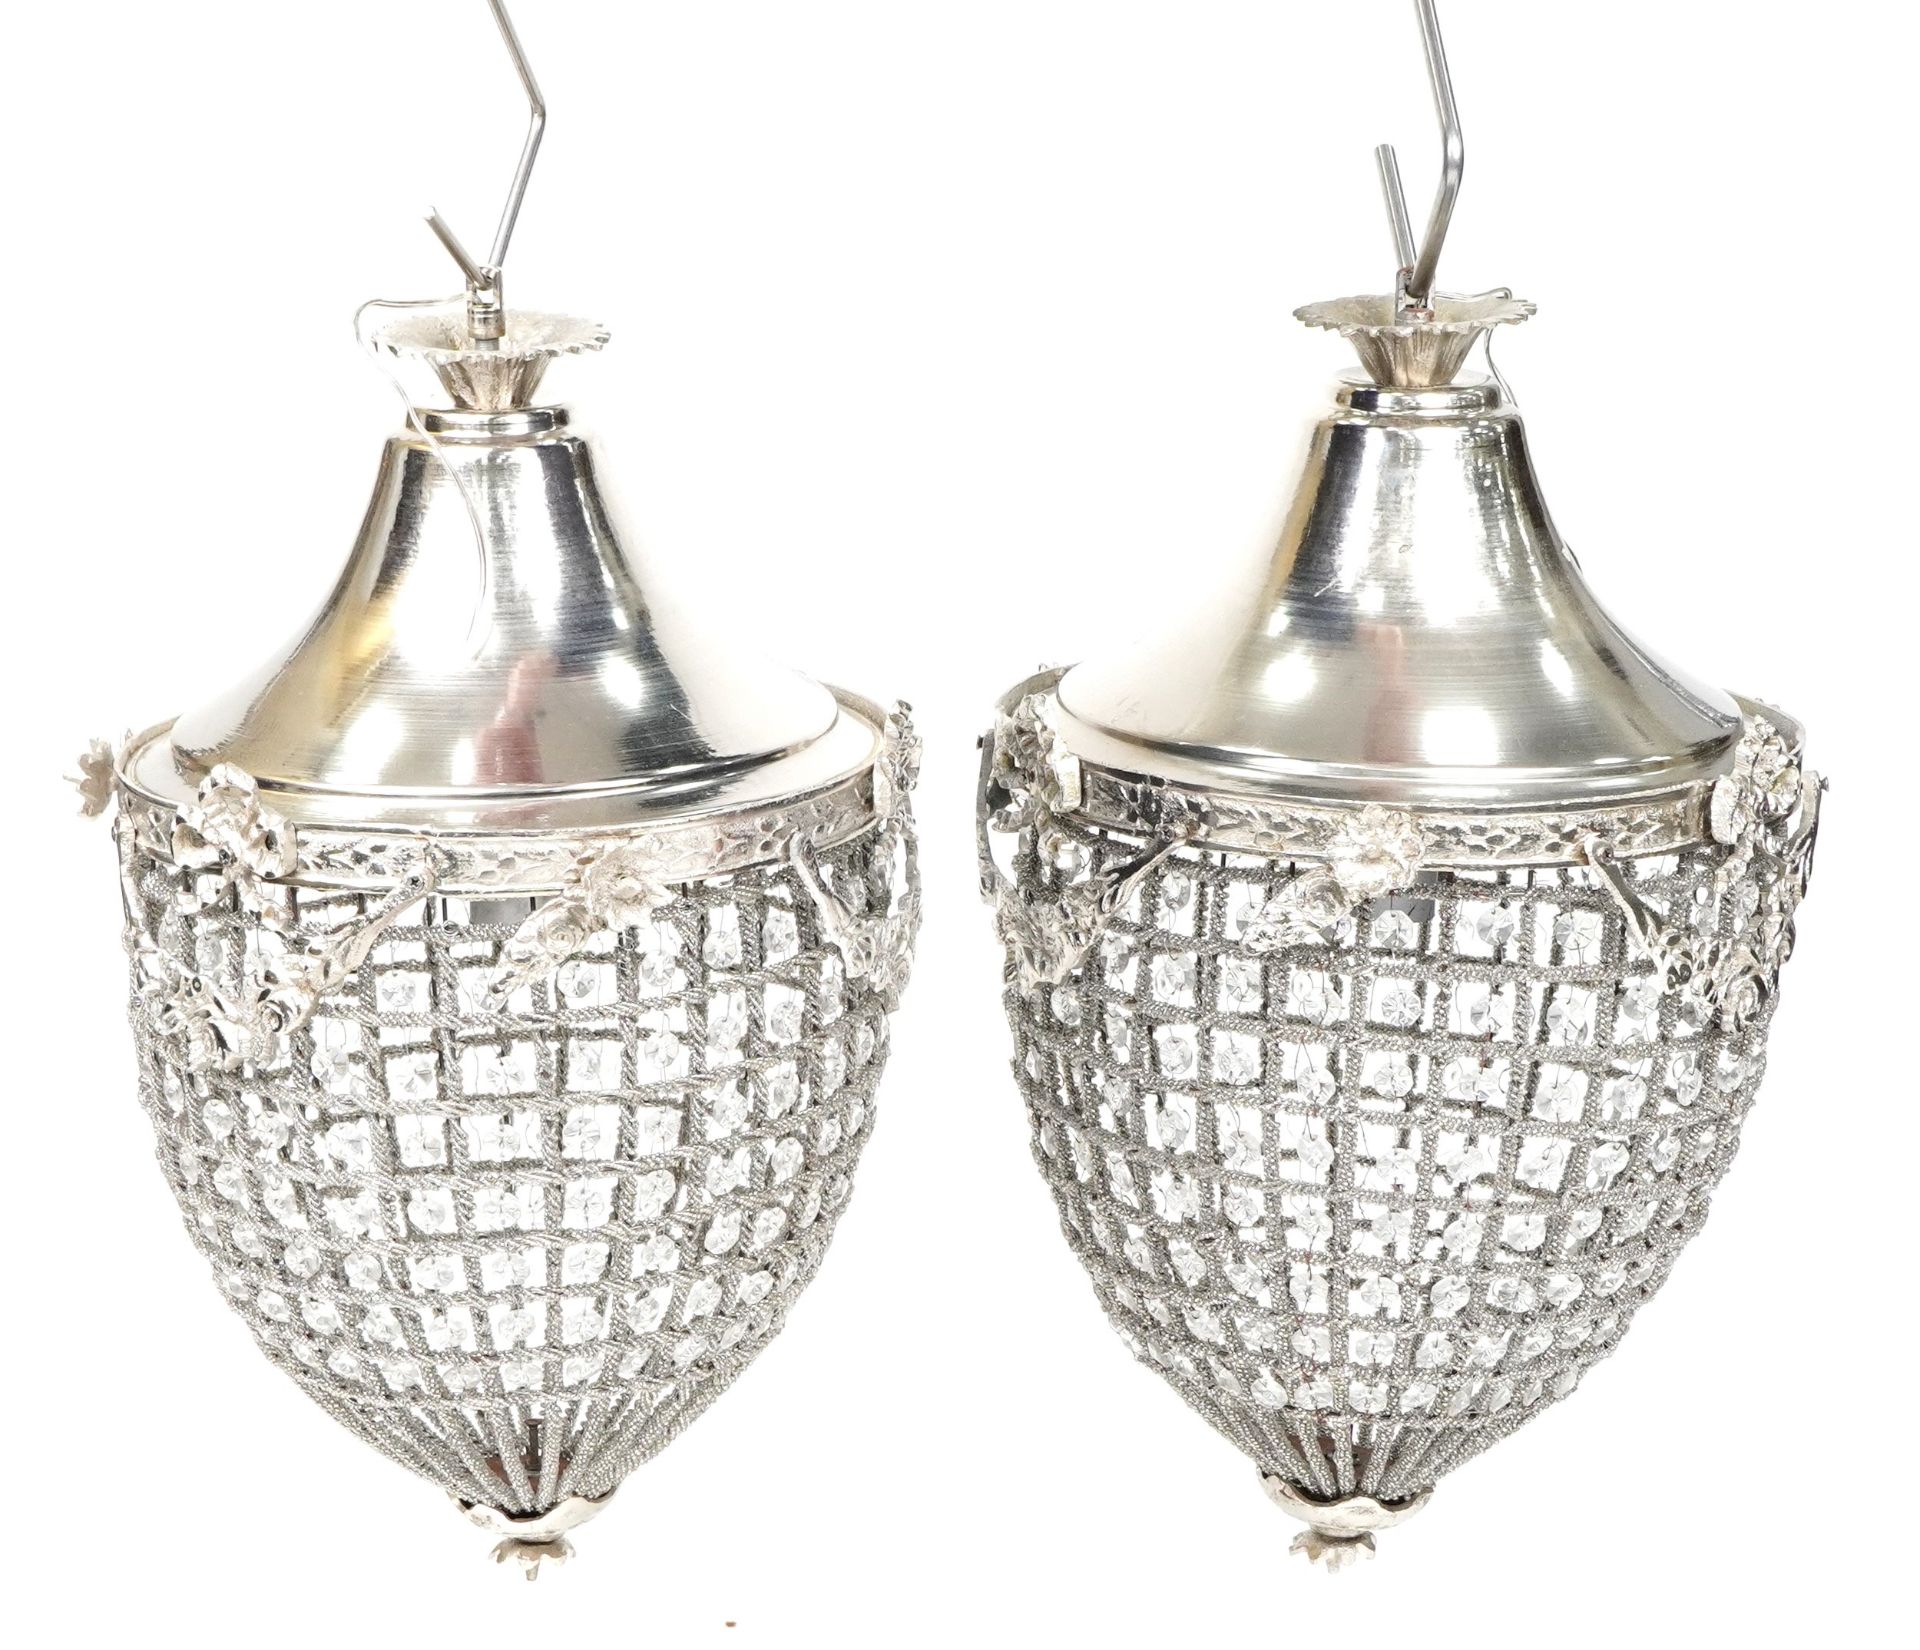 Pair of ornate silvered acorn design chandeliers decorated with swags and bows, 52cm high : For - Image 2 of 2